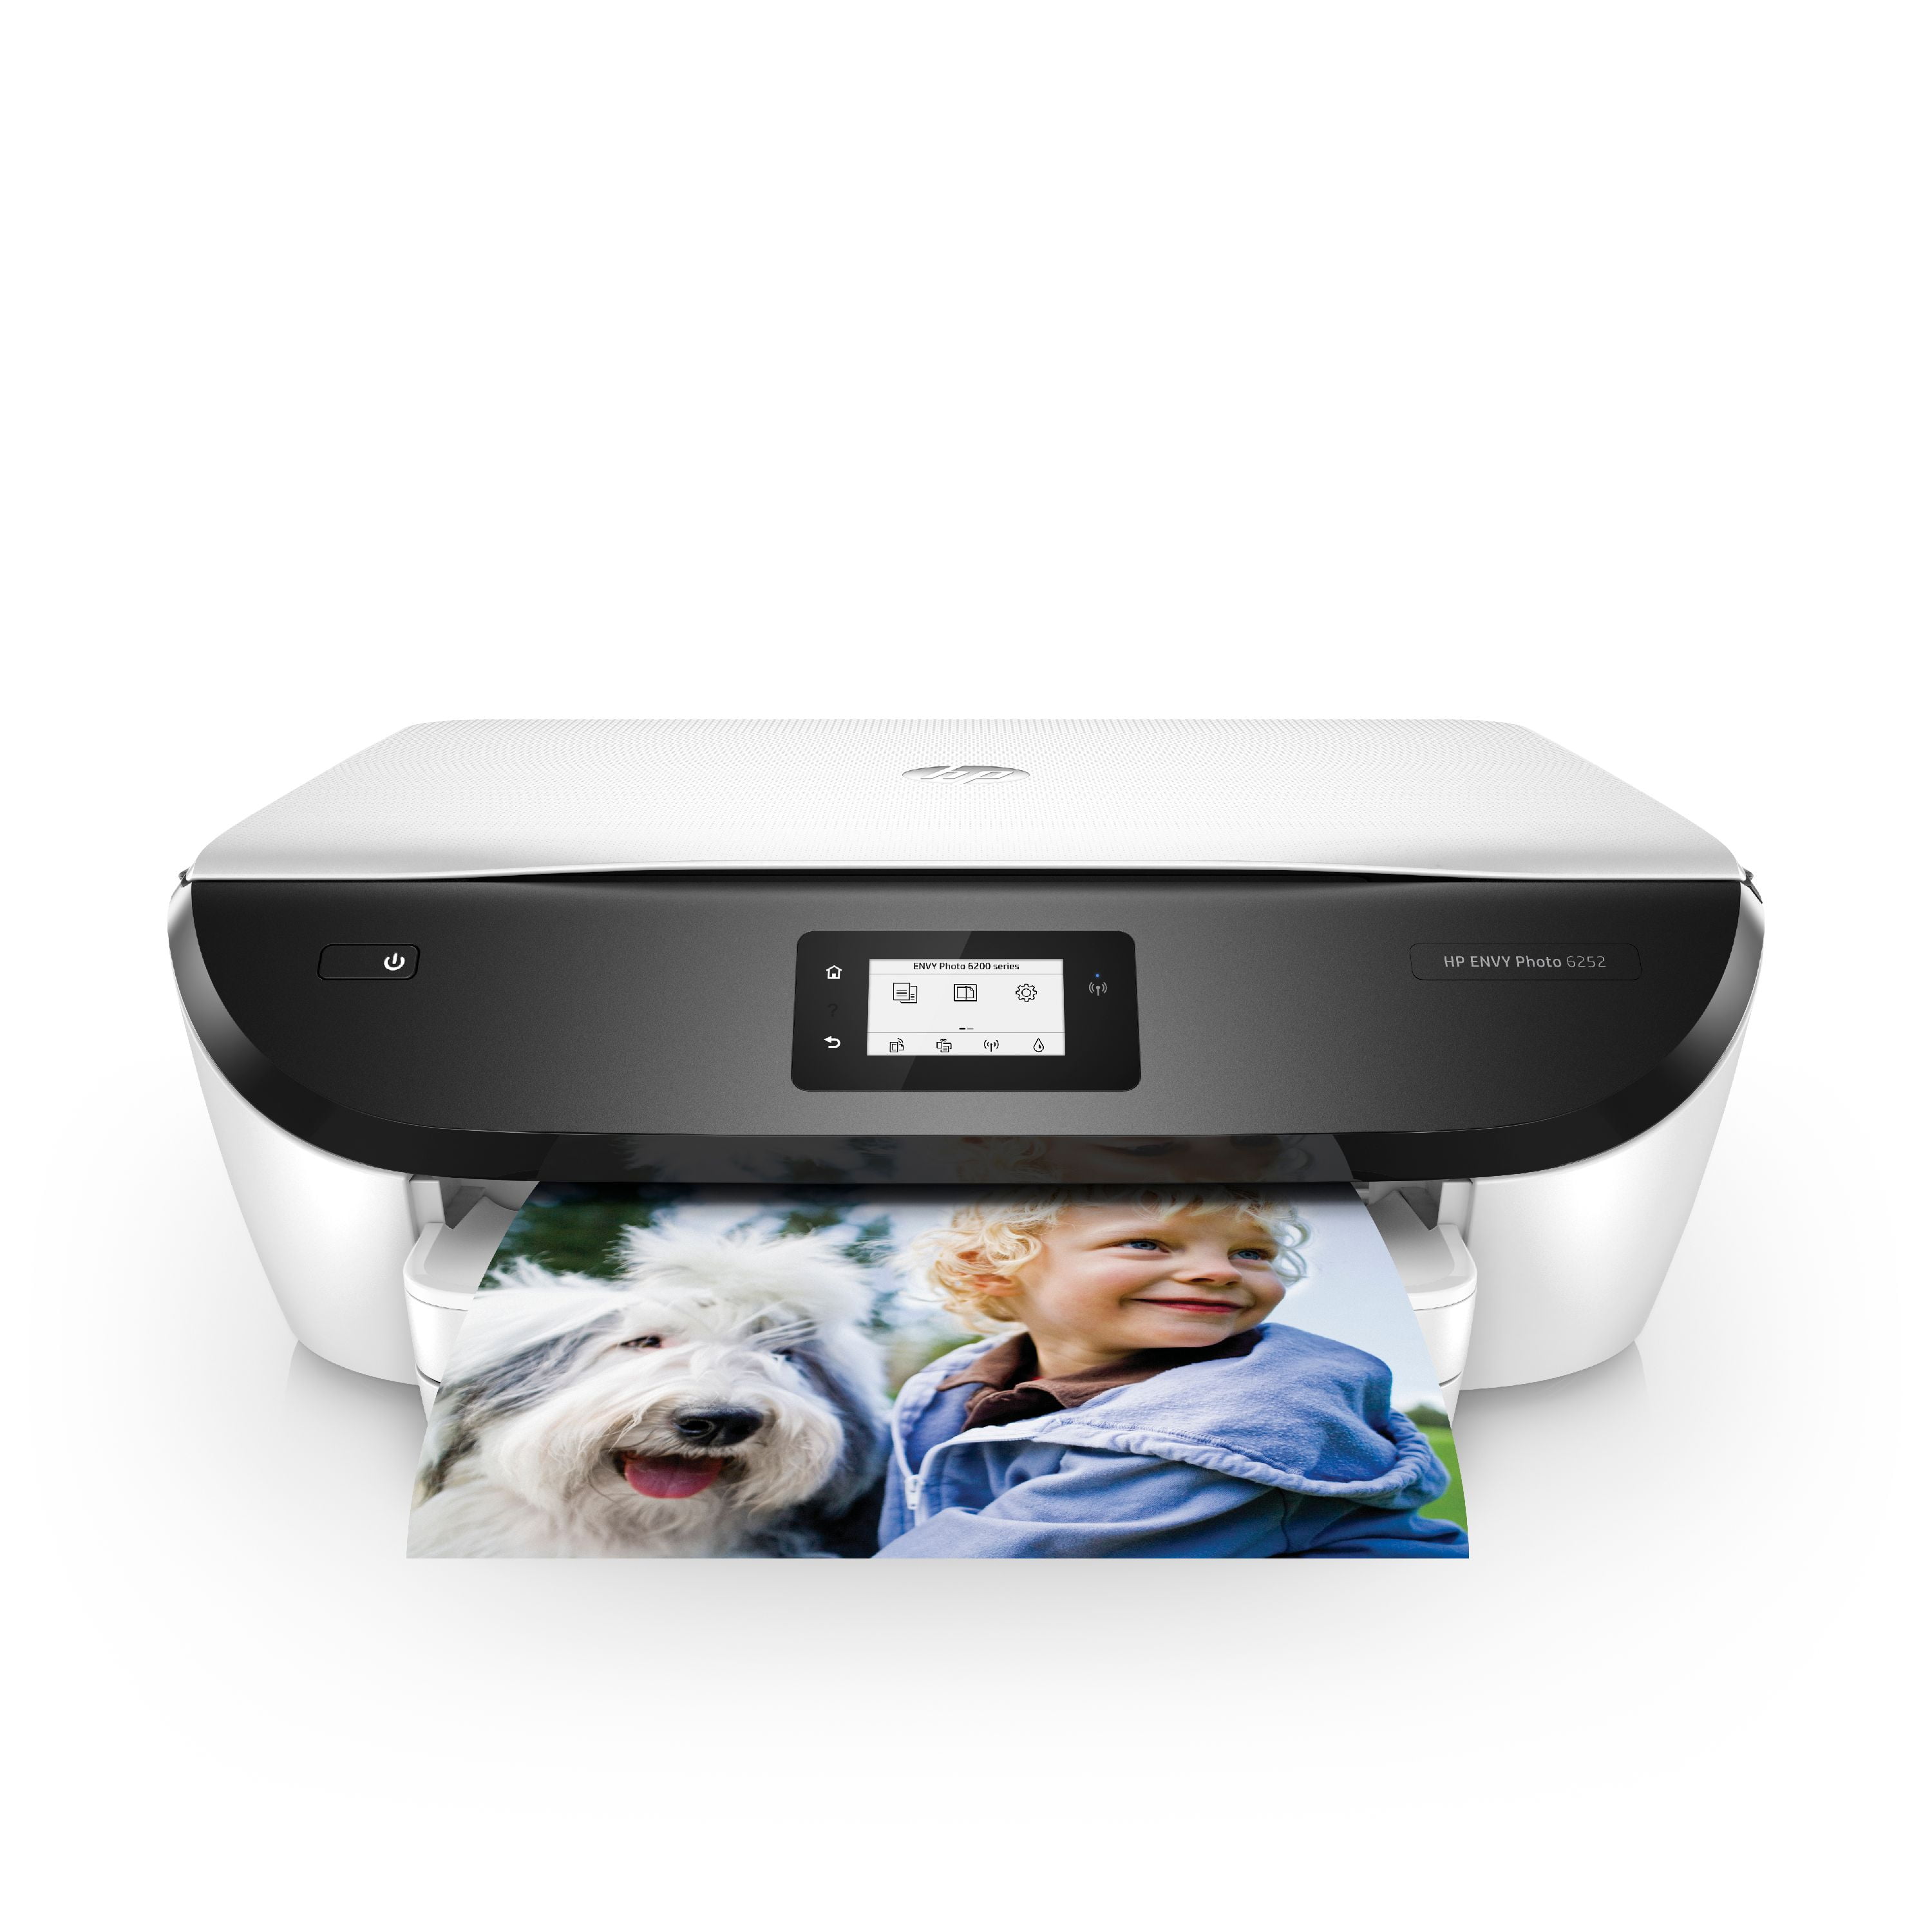 HP ENVY Photo 6252 All in One Photo Printer with Wireless Printing 